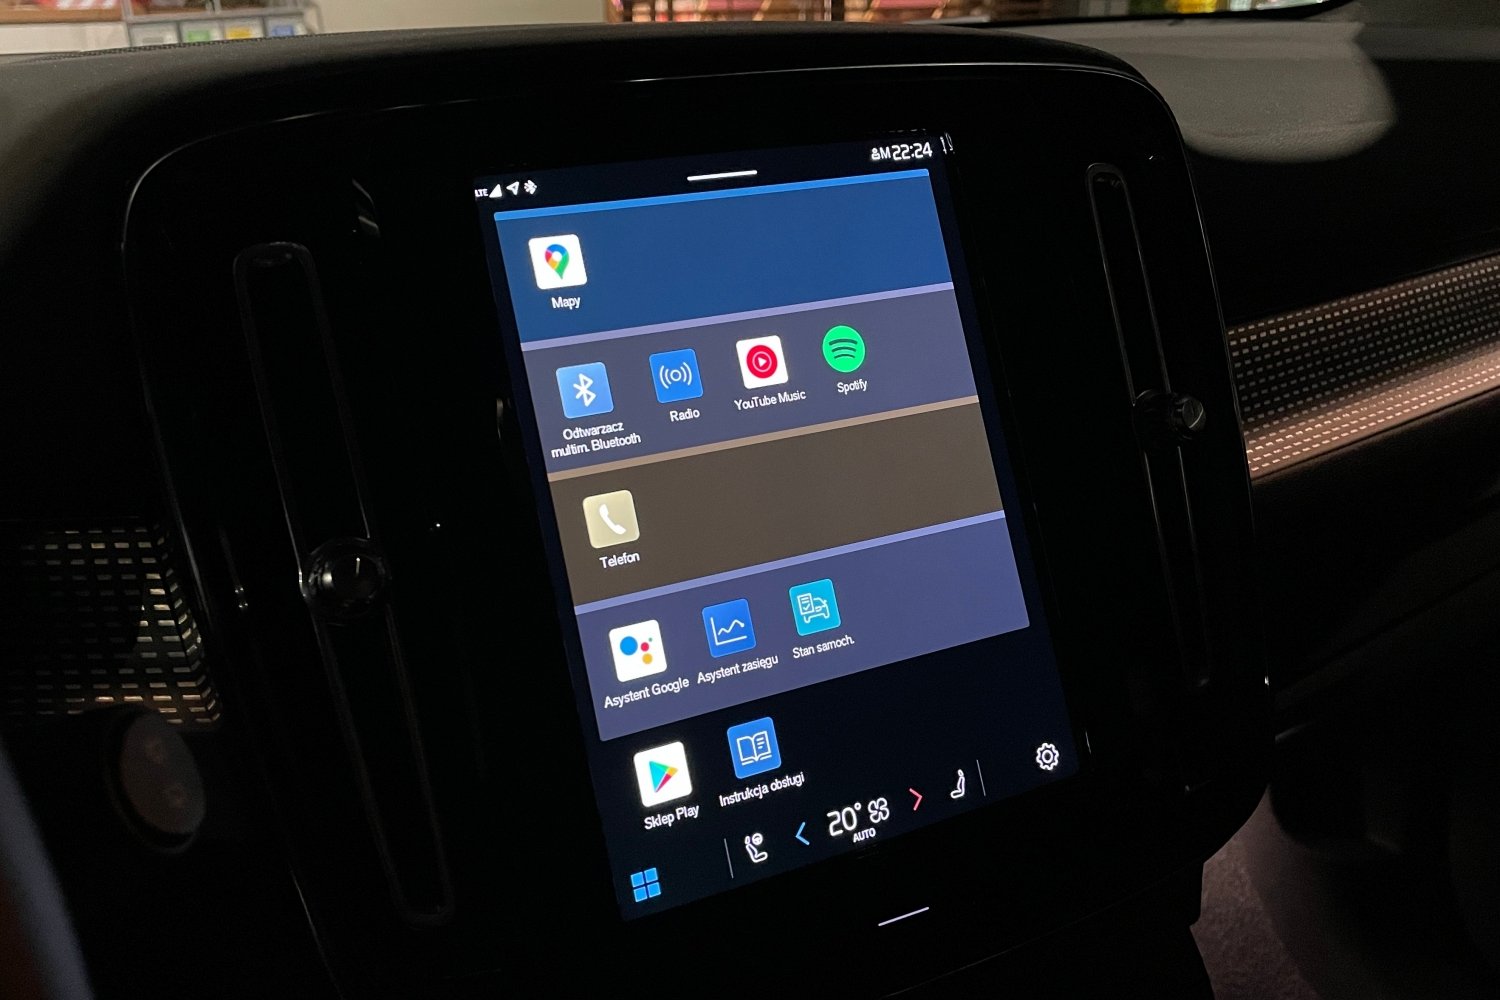 Android Automotive